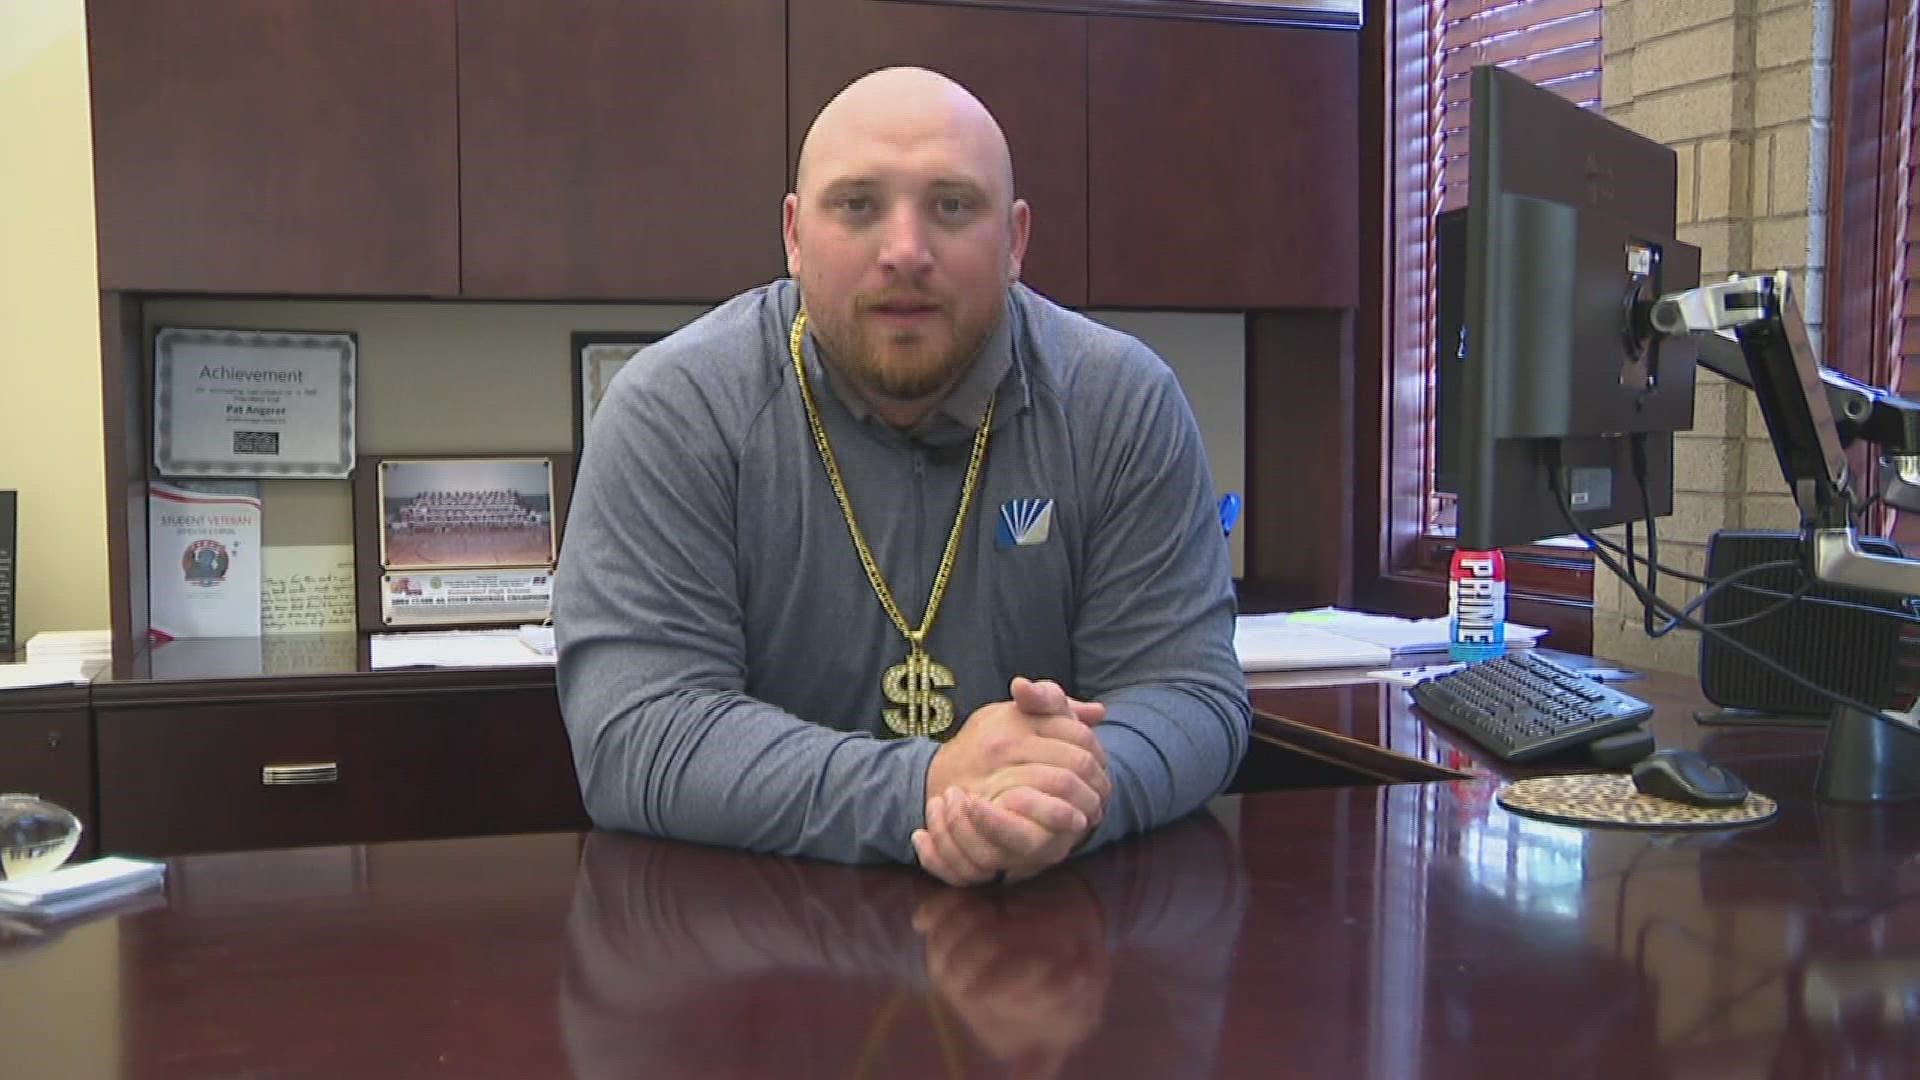 Matt and Kory also caught up with Rock Island's head coach ahead of the team's homecoming rivalry game against Moline.